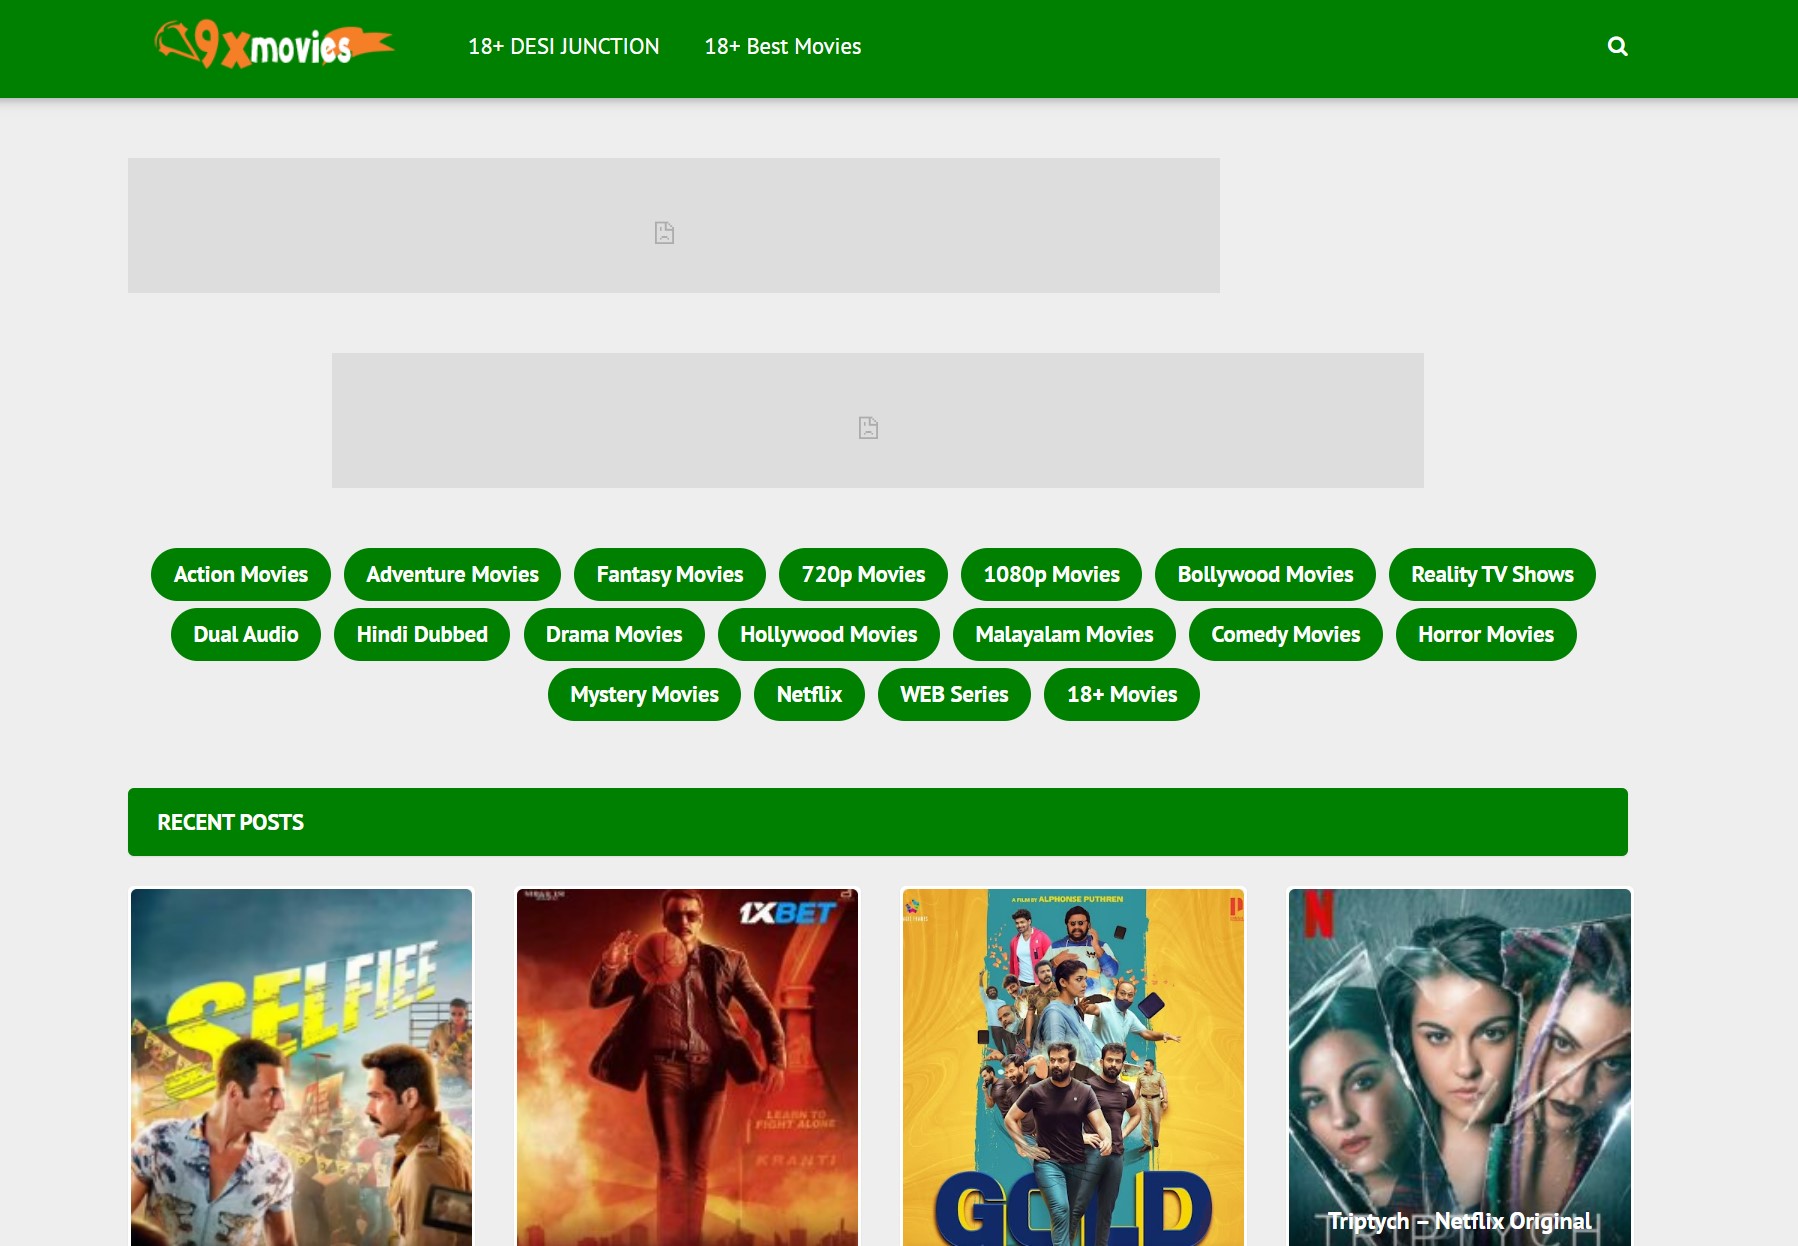 9xmovies.pro - Top 7 Websites for Downloading Bollywood Movies